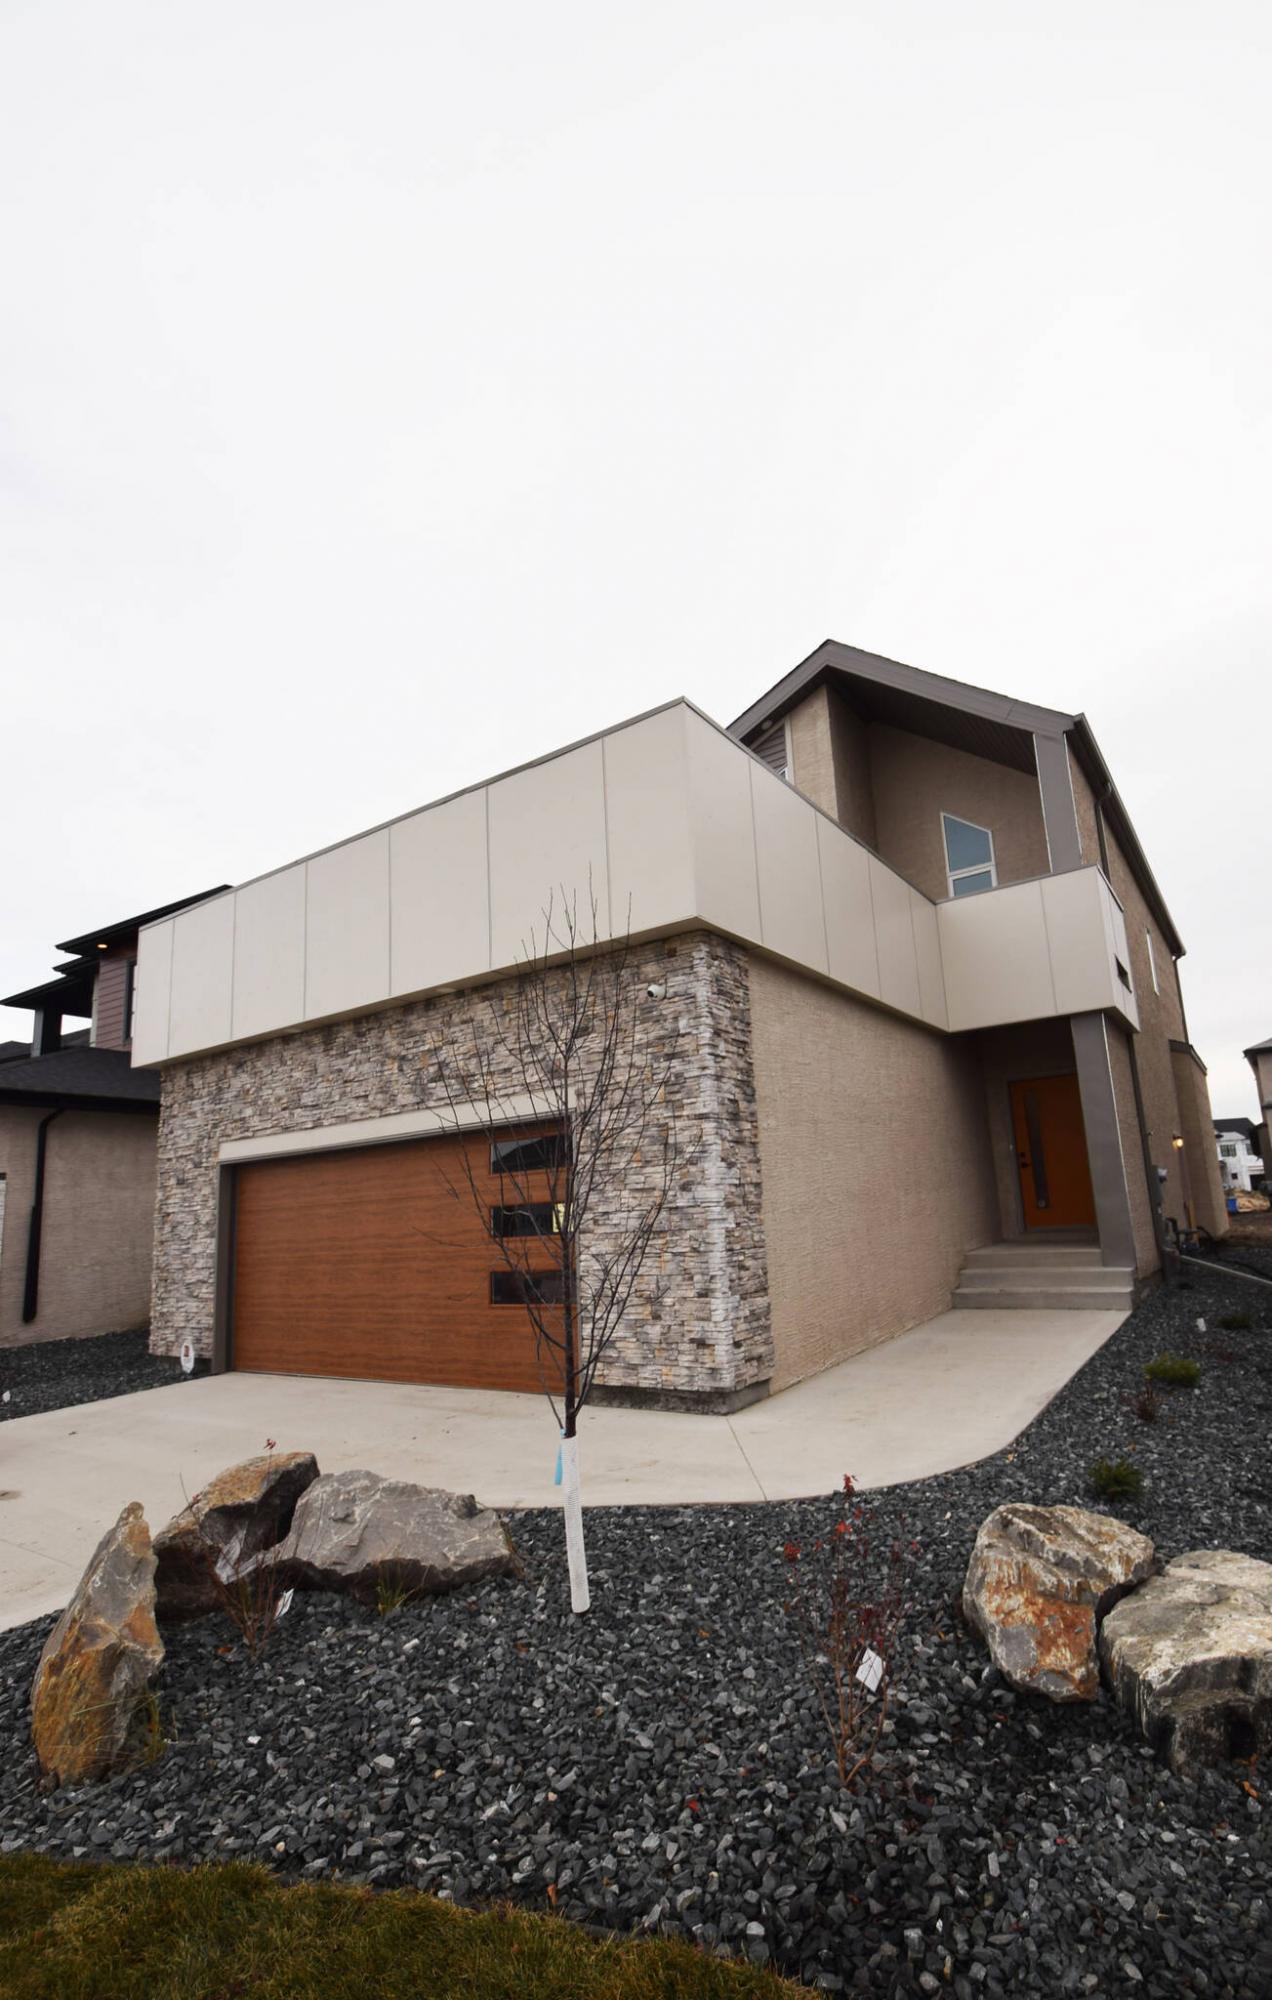  <p>Todd Lewys / Winnipeg Free Press</p>
                                <p>Featuring a fresh plan designed just in time for the 2022 Fall Parade of Homes, the Hazel offers a high level of flexibility and delivers loads of curb appeal. </p> 